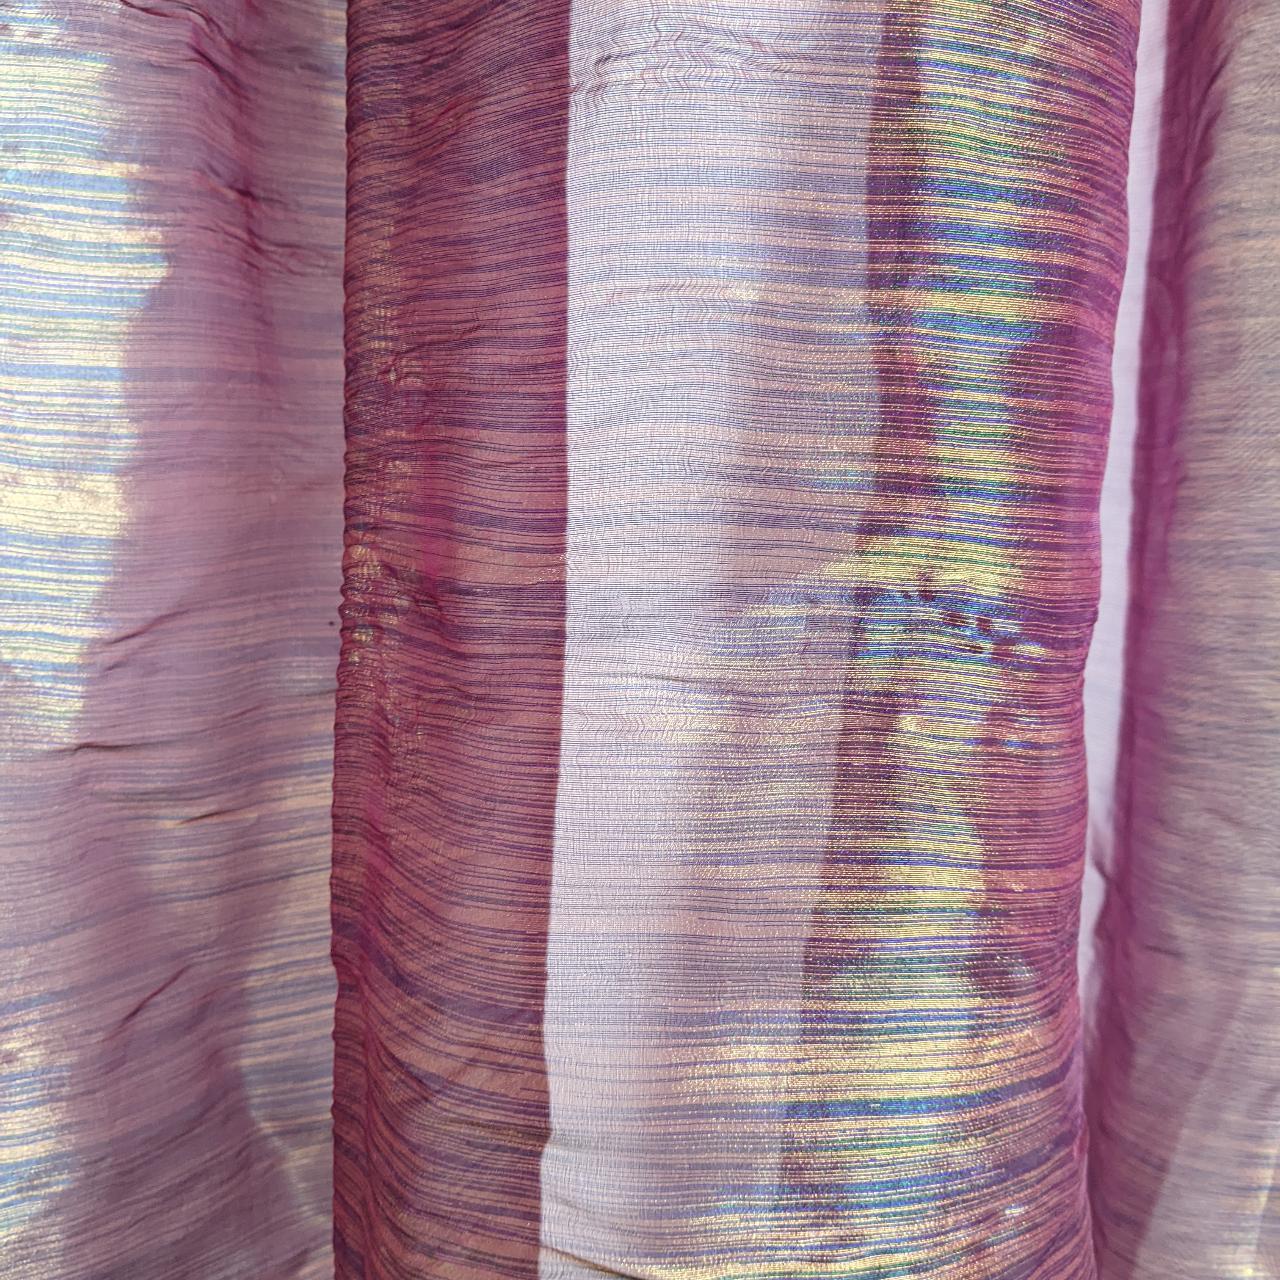 Product Image 3 - Bright striped curtain sheers

2 Panels.